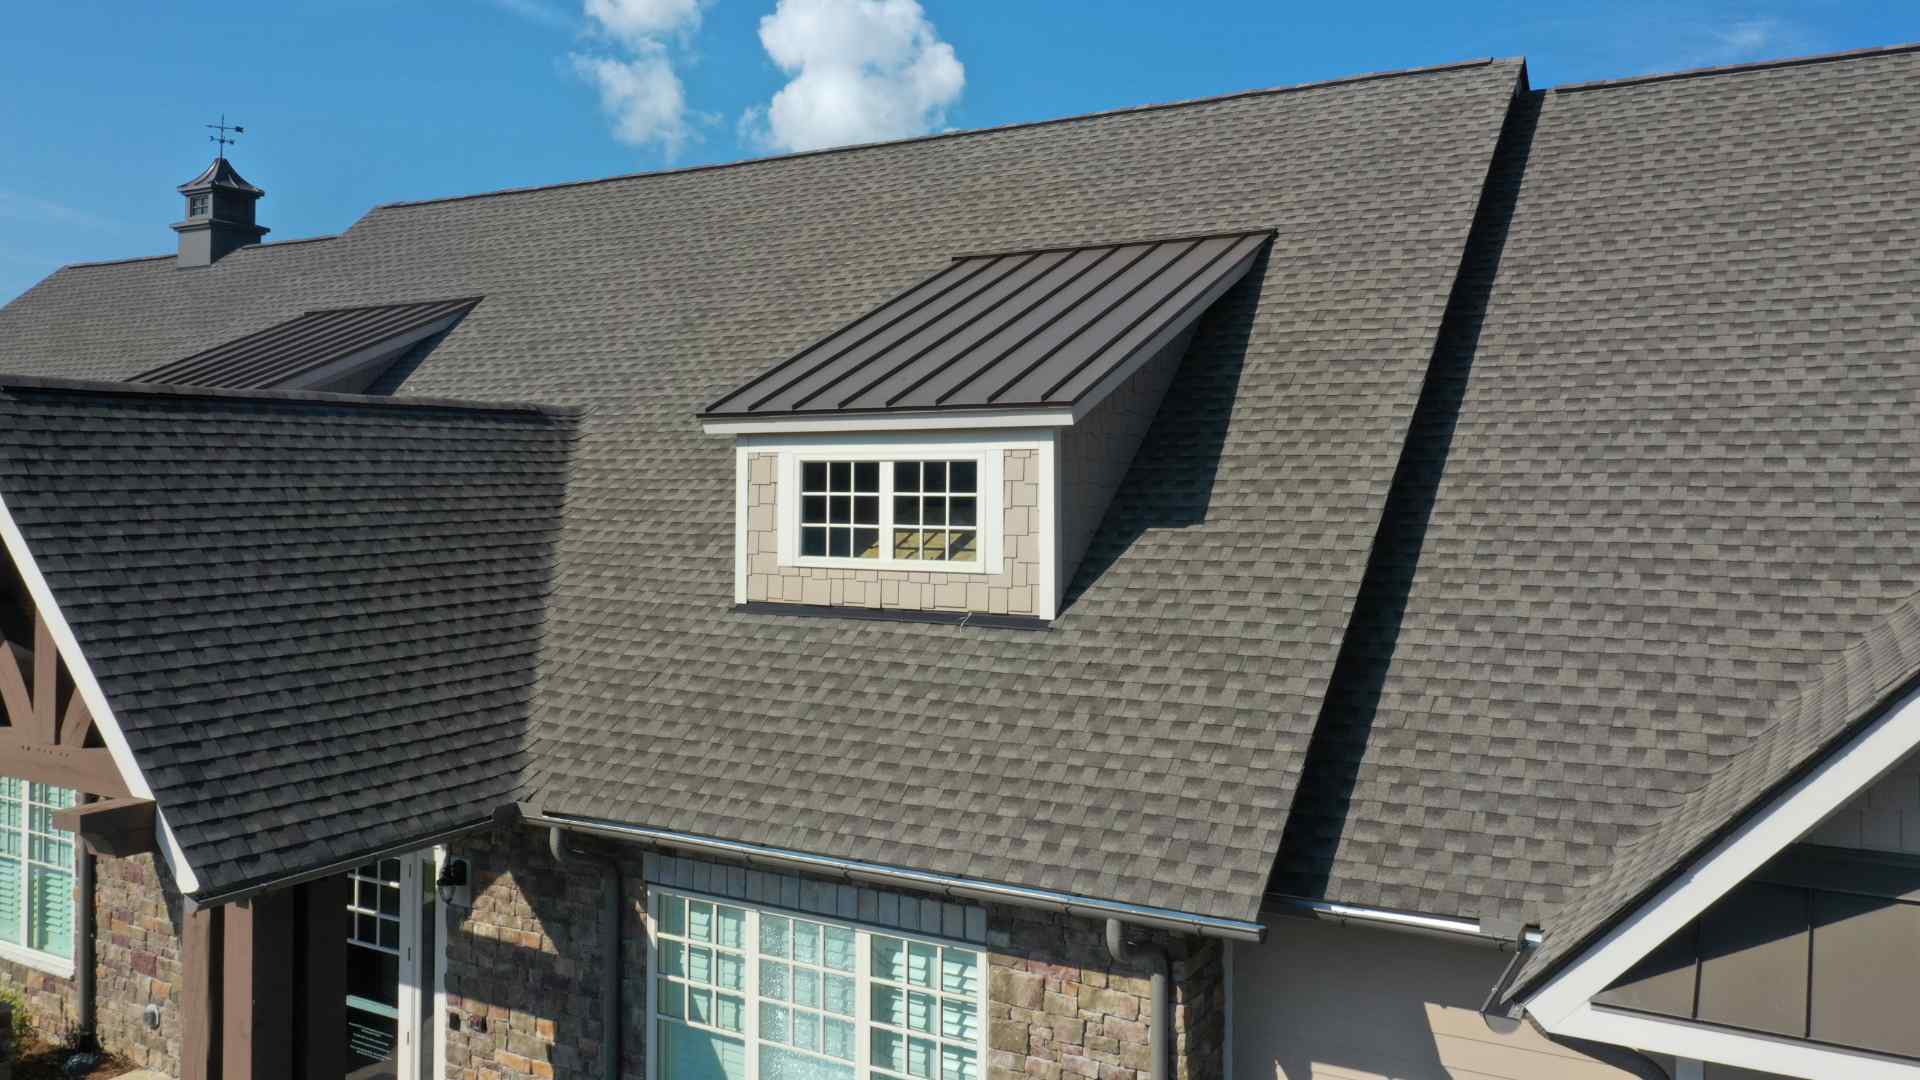 ROOFING COMPANY SERVING LOUISBURG KS AND MIAMI COUNTY KS